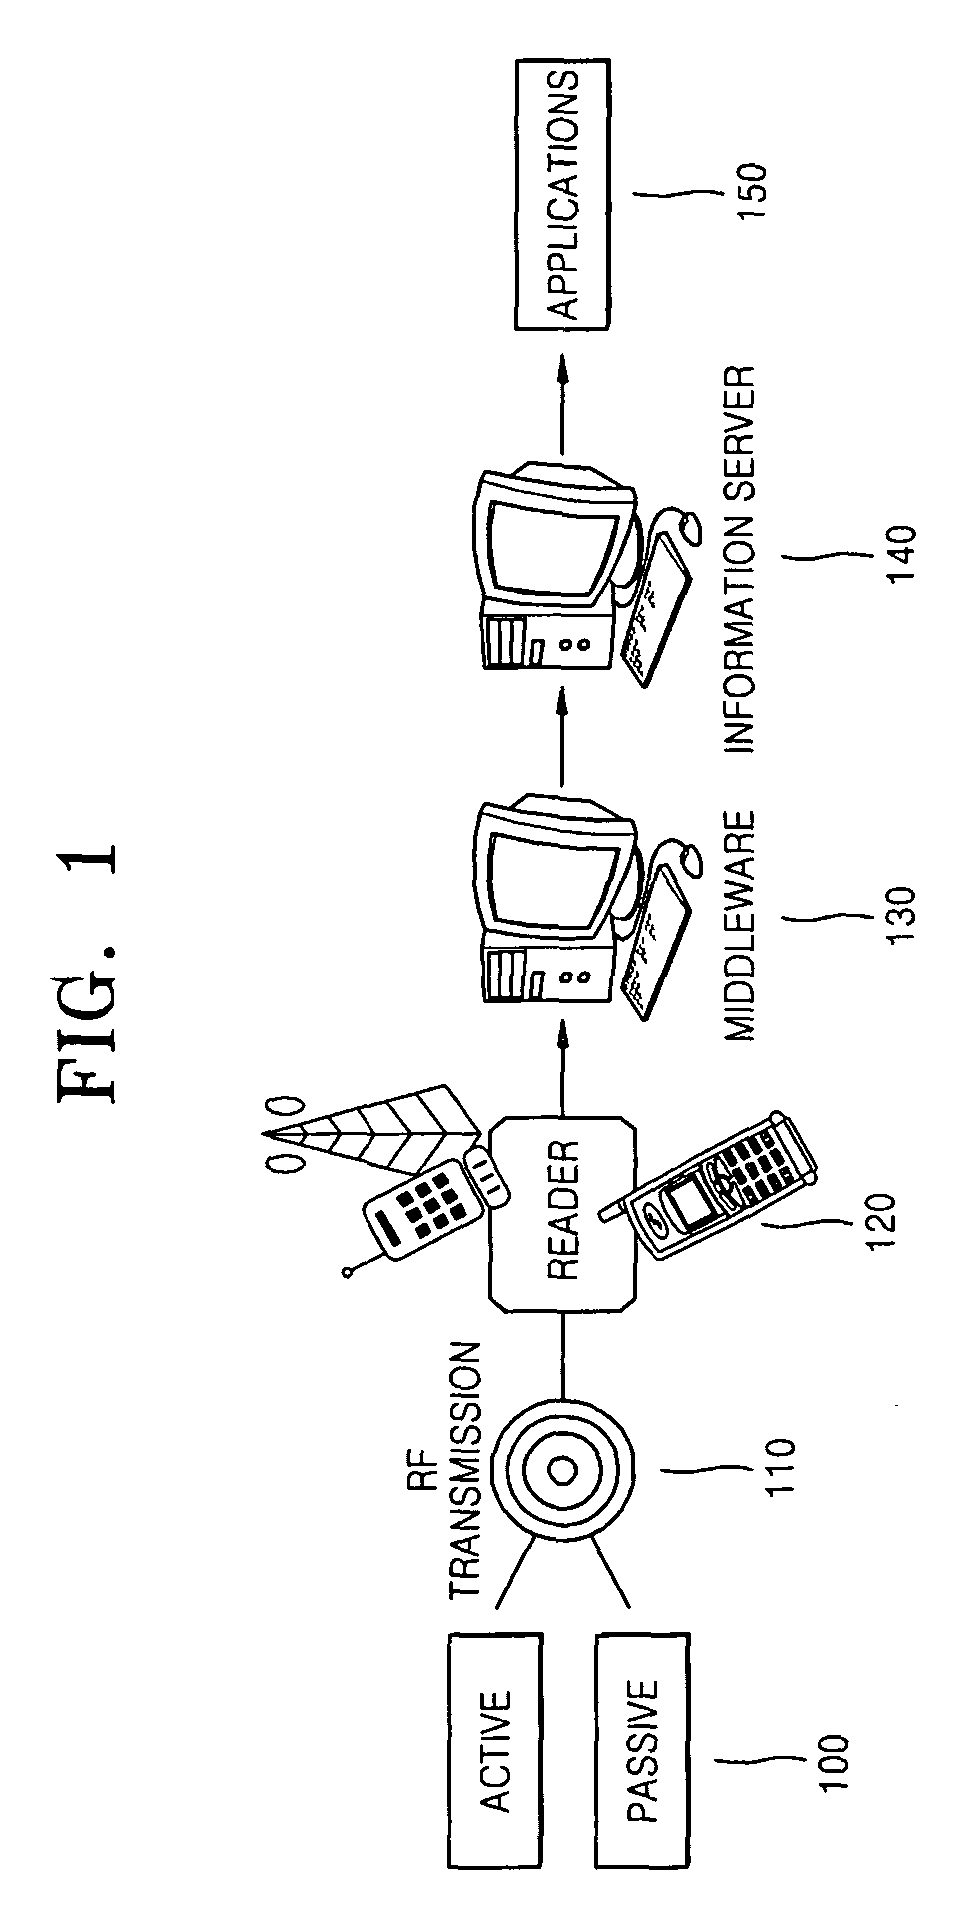 Electronic tag including privacy level information and privacy protection apparatus and method using RFID tag